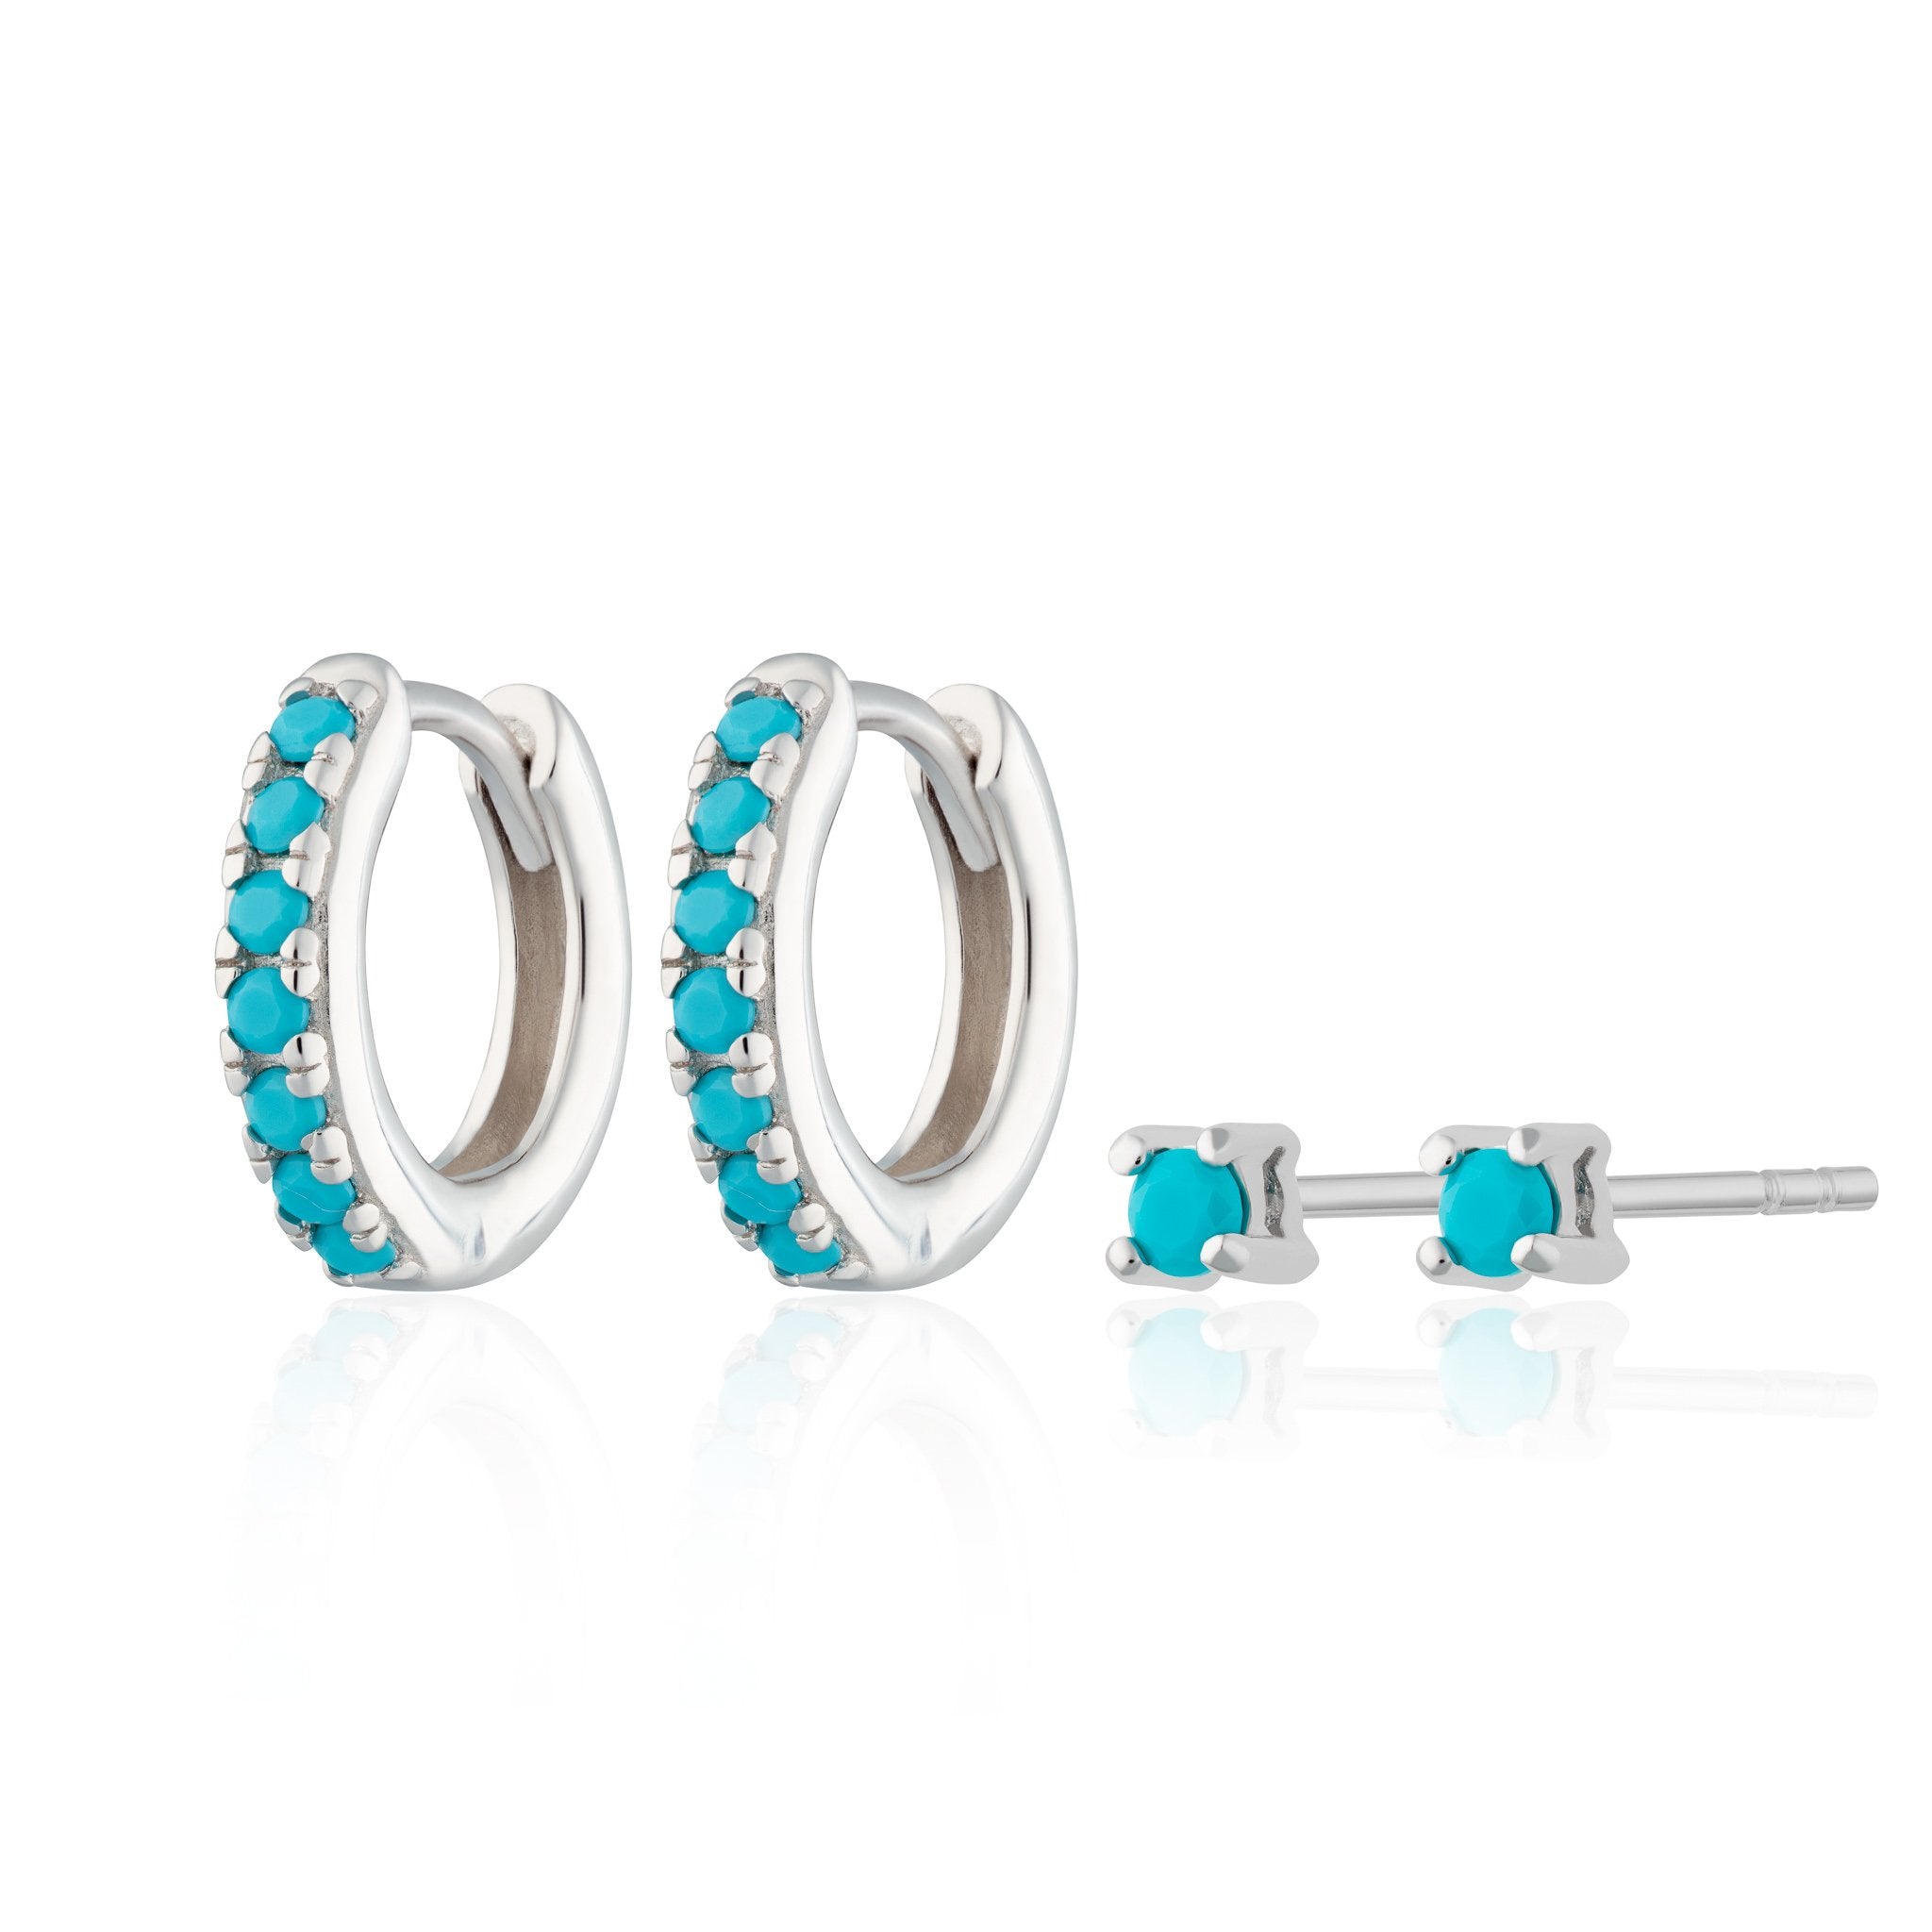 Turquoise Stone Huggie and Tiny Stud Set of Earrings